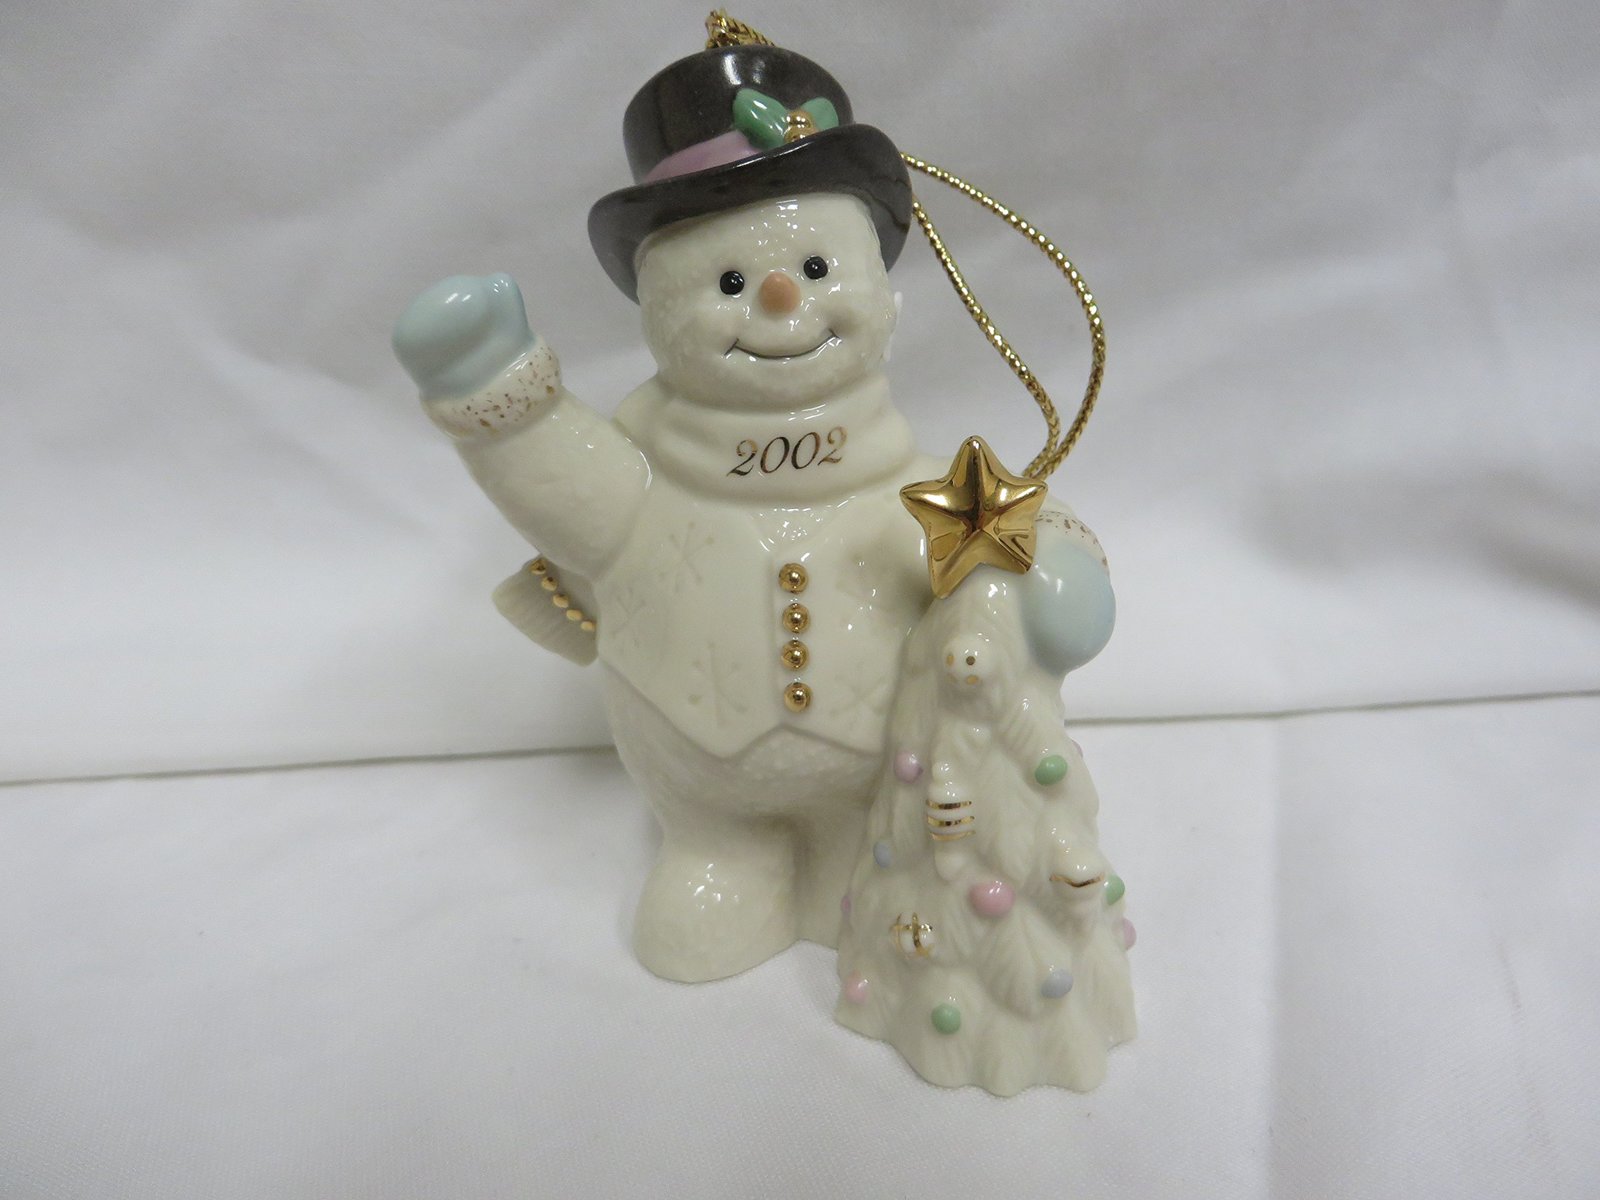 Primary image for Lenox 2002 Holiday Greetings Snowman Ornament